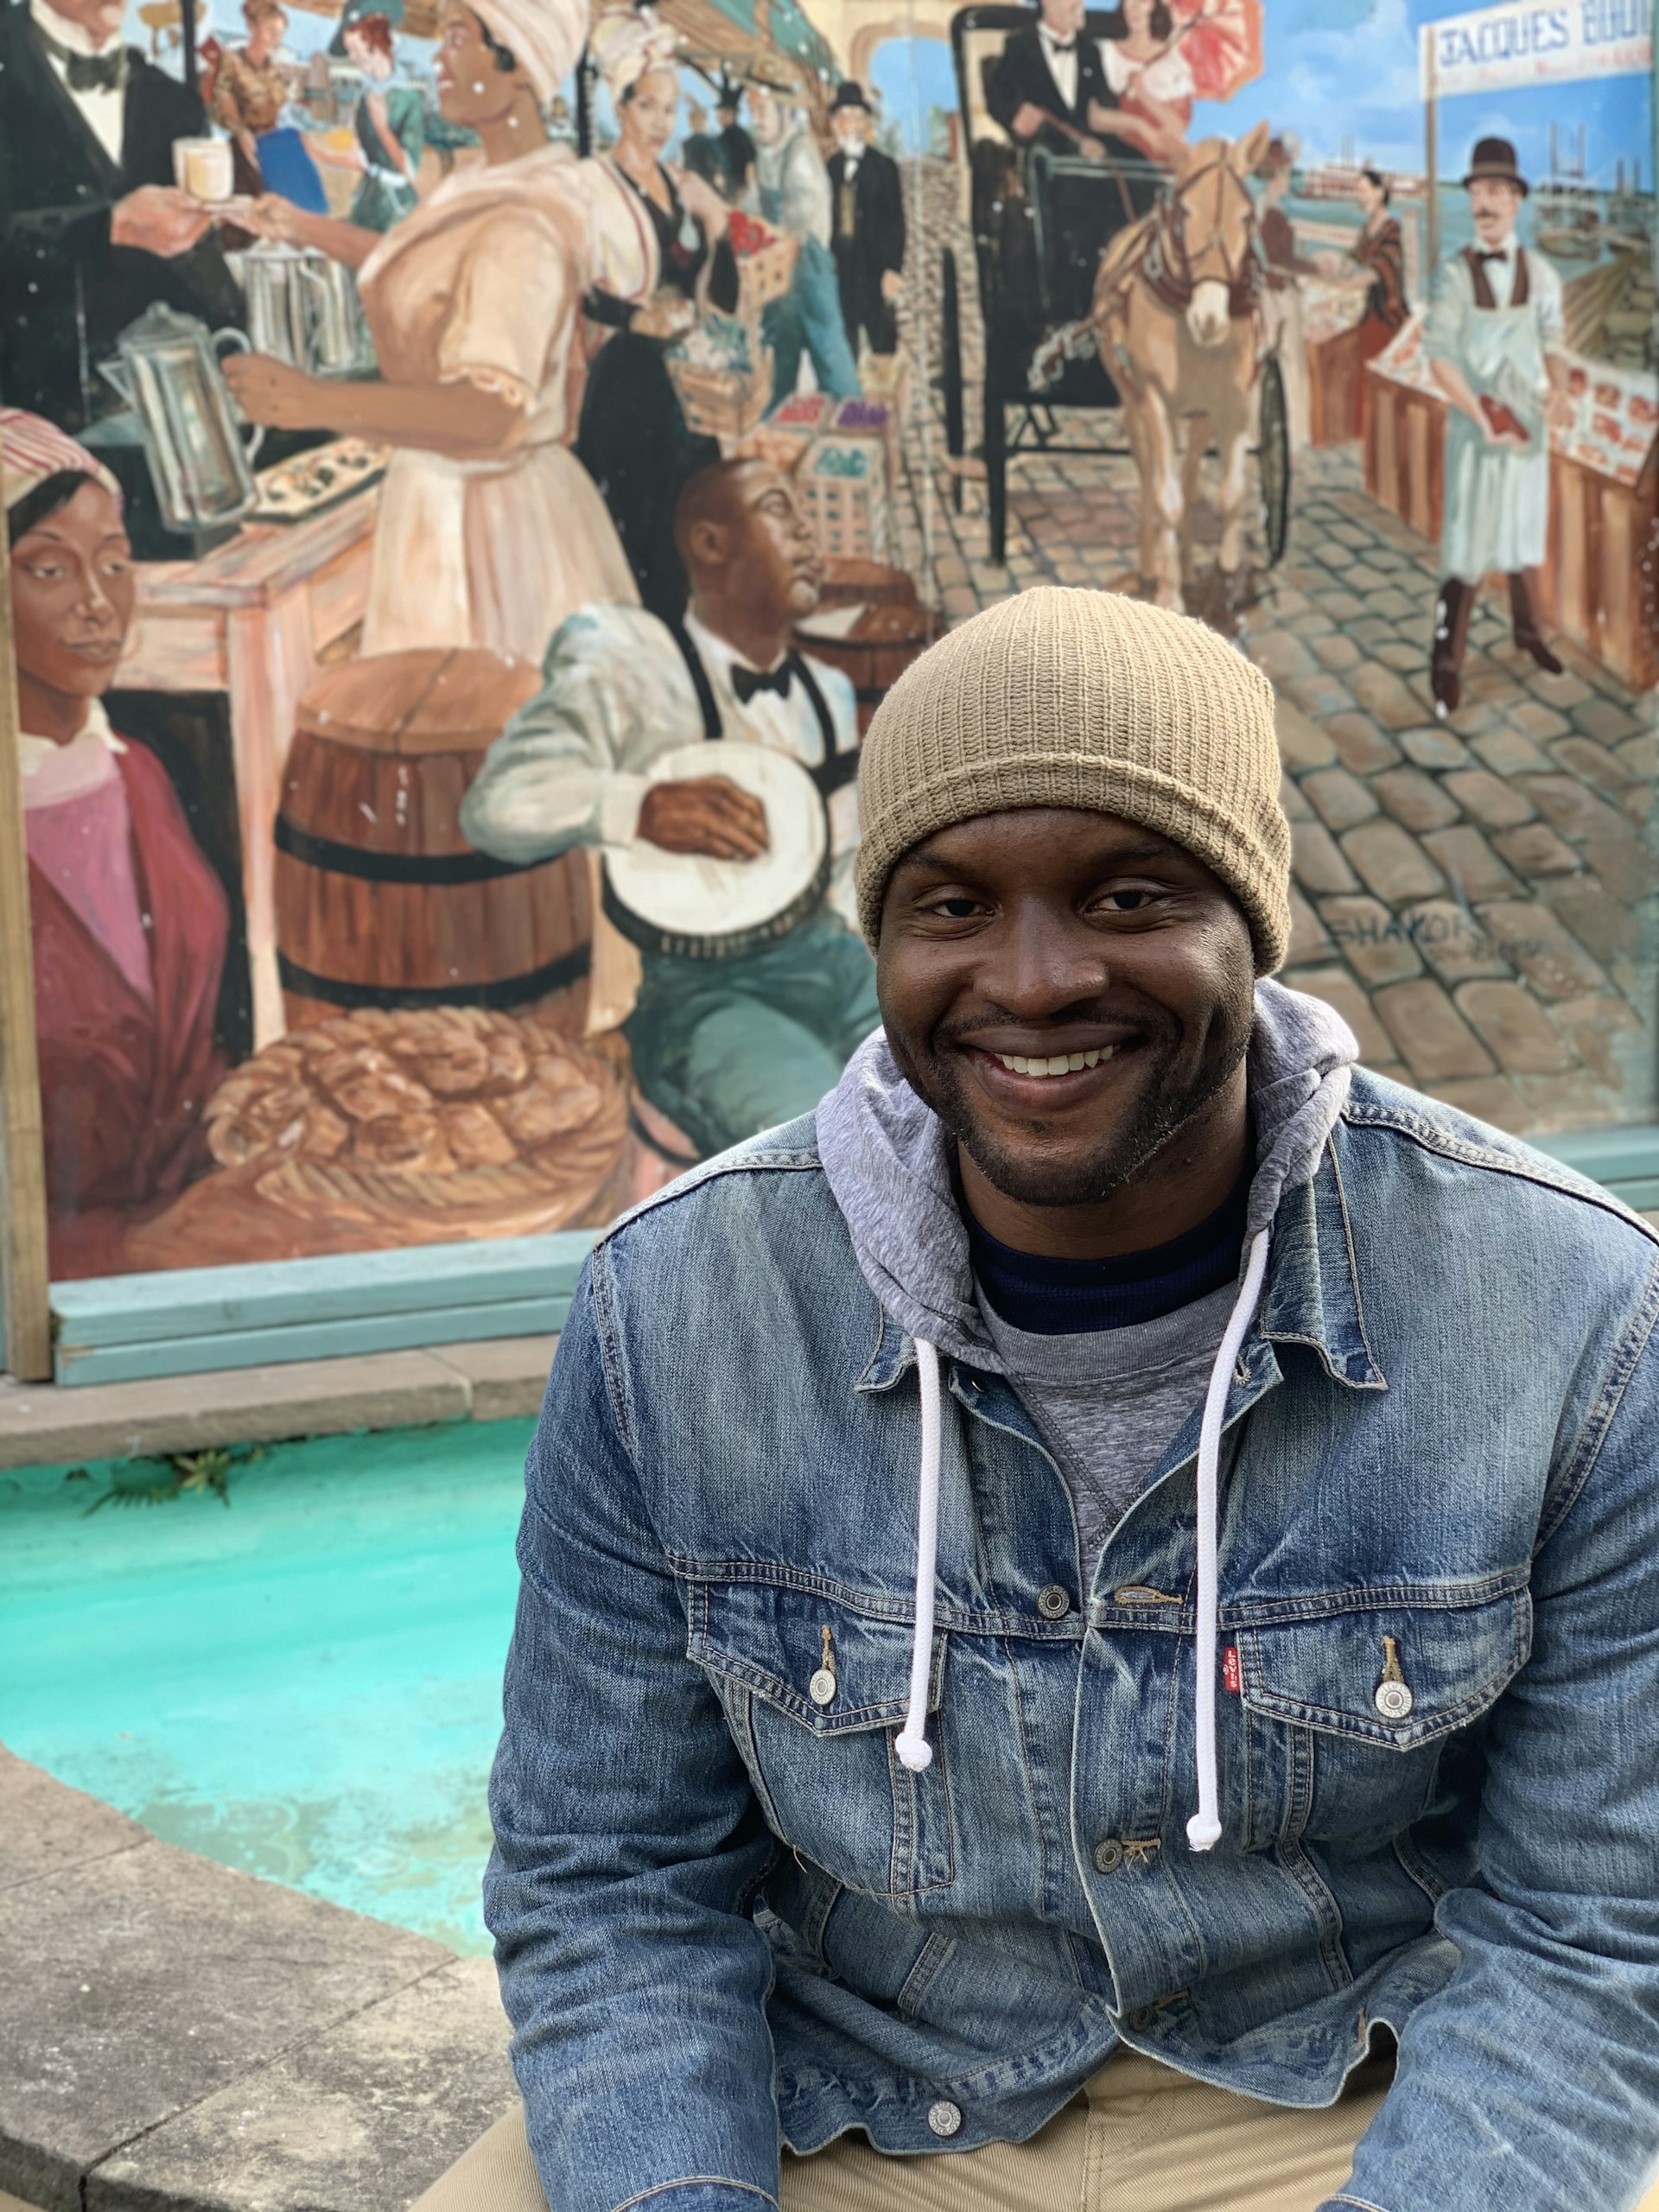 A black man sitting in front of a mural smiles at the camera